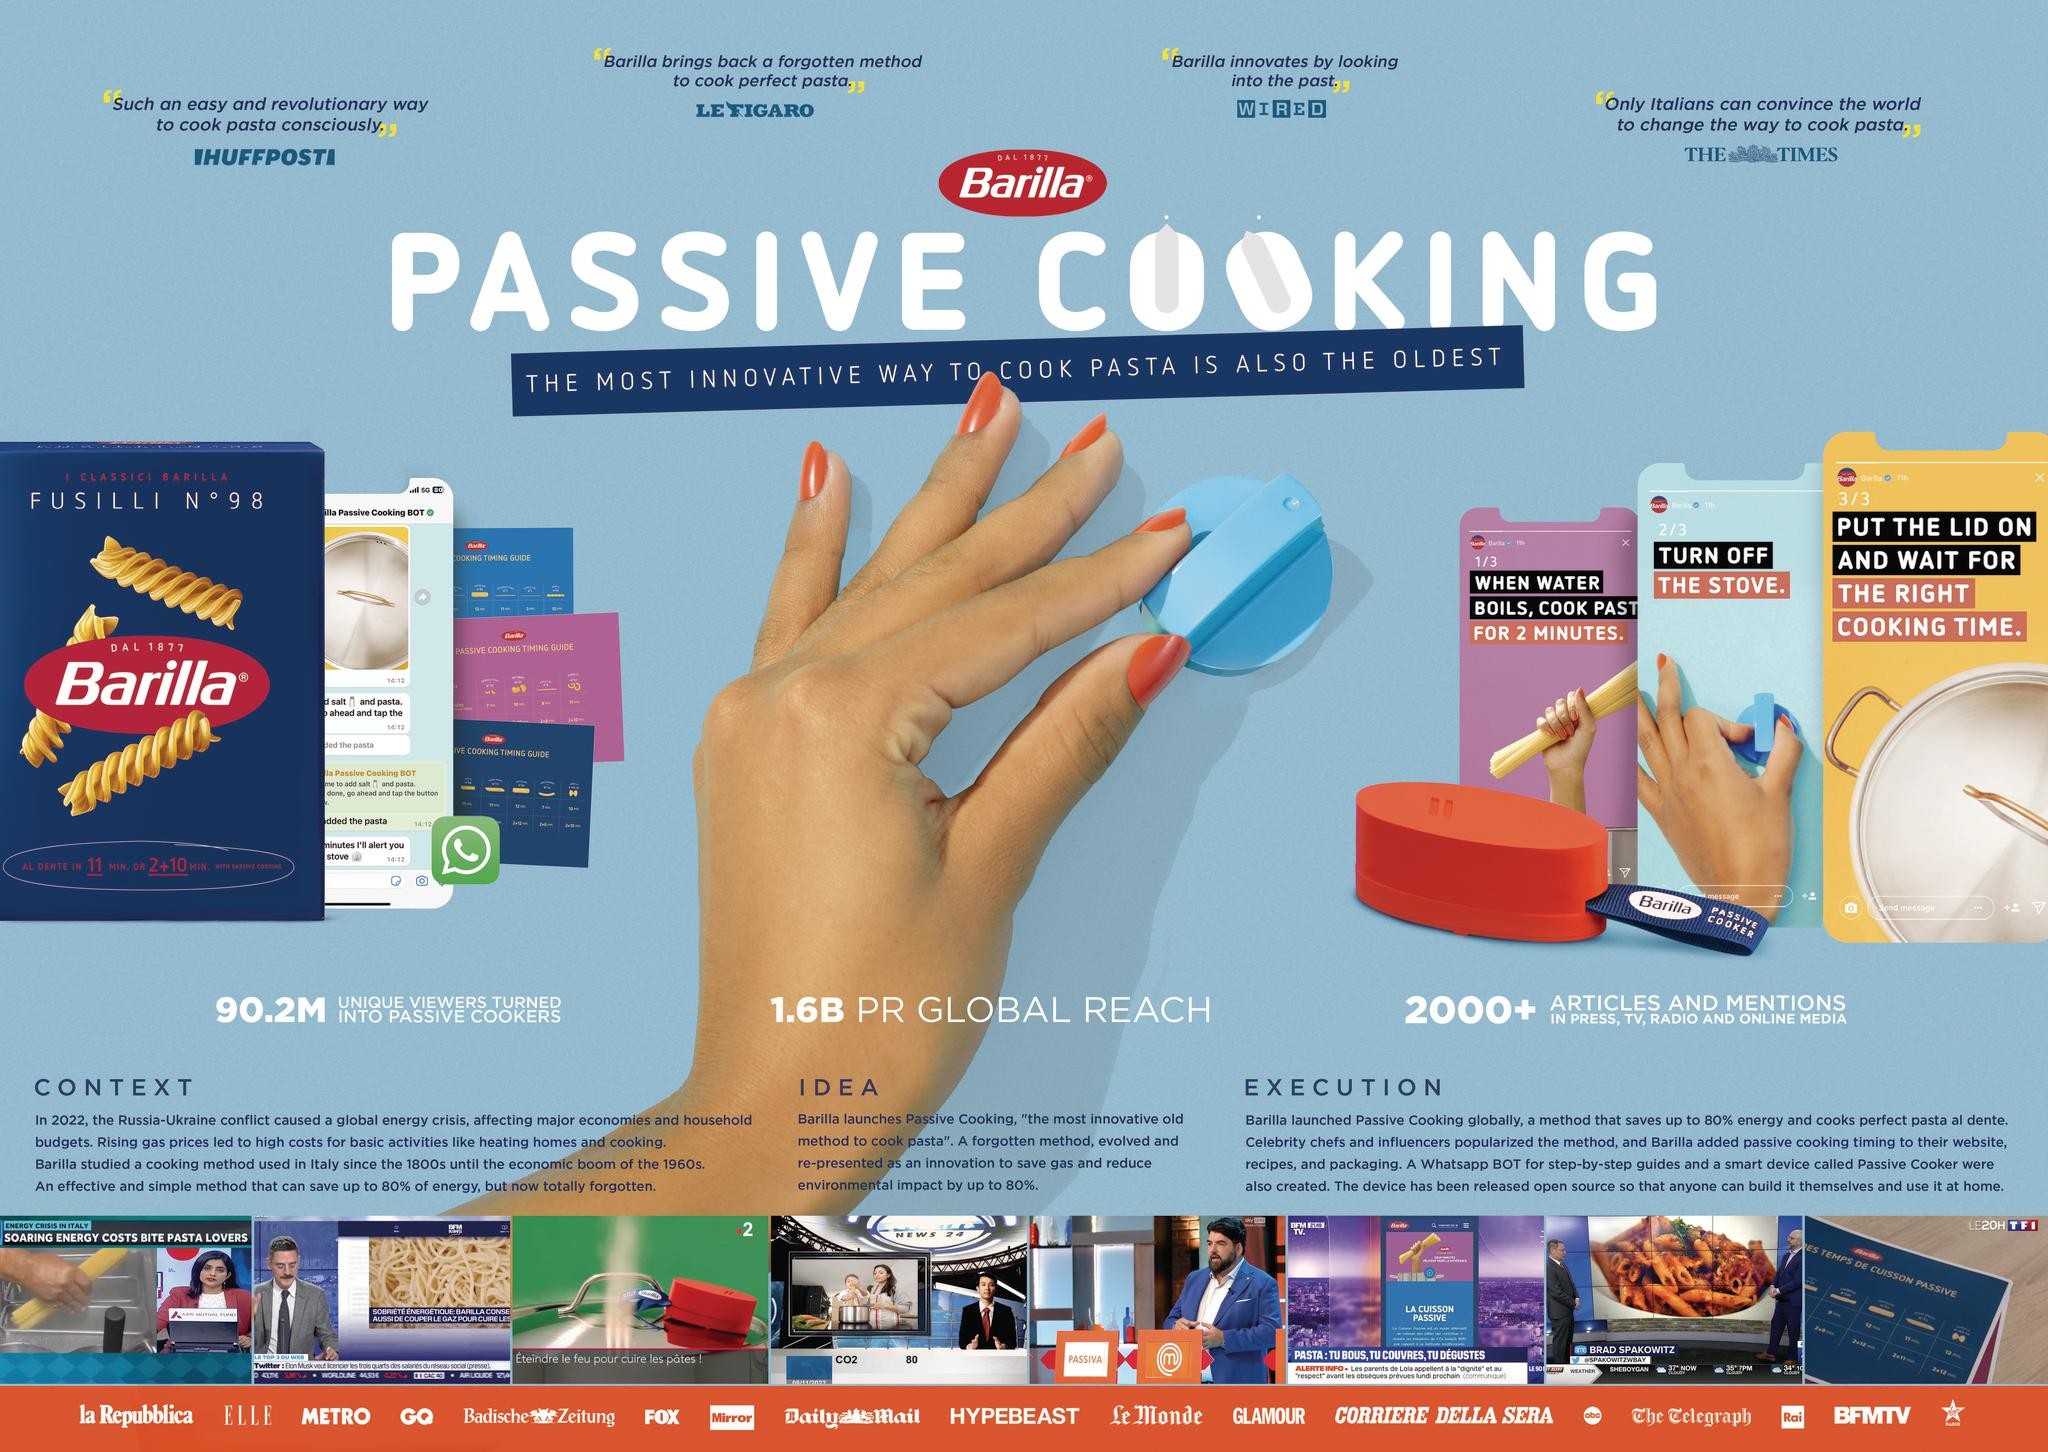 PASSIVE COOKING